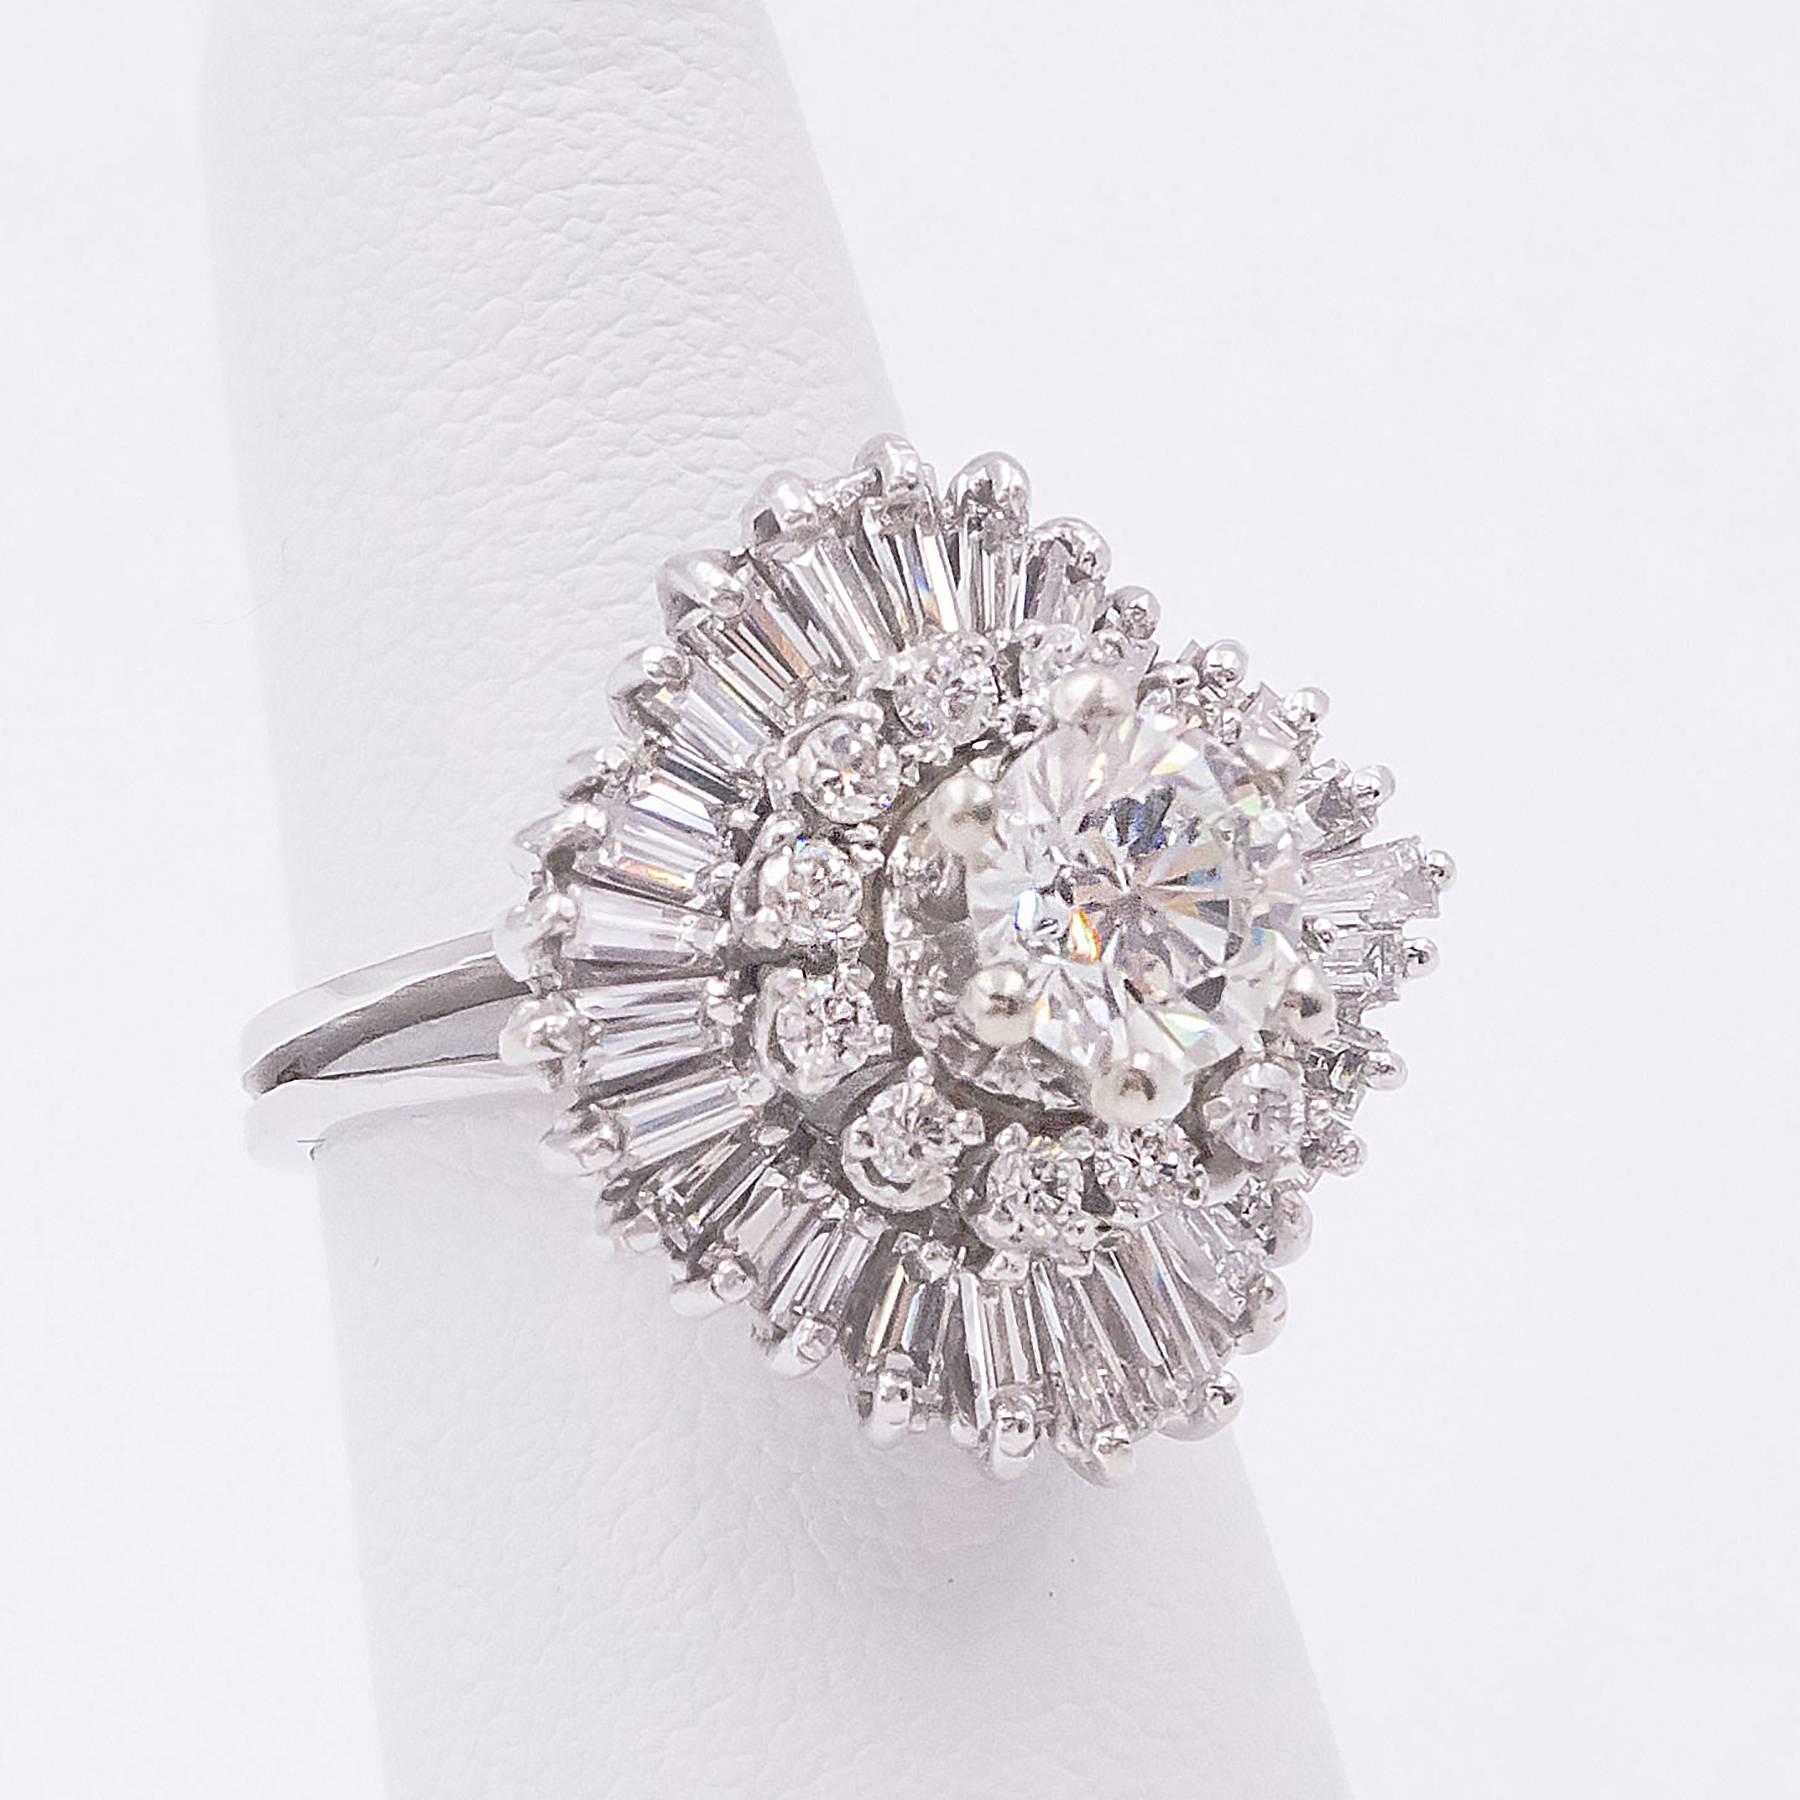 A large and impressive Diamond Ballerina style ring is centred with one round, Brilliant Cut 1.05 carat Diamond inside a Surround of twelve Round Brilliant cut smaller stones and surrounded with waves of 28 fancy Baguette Cut  Diamonds. The total